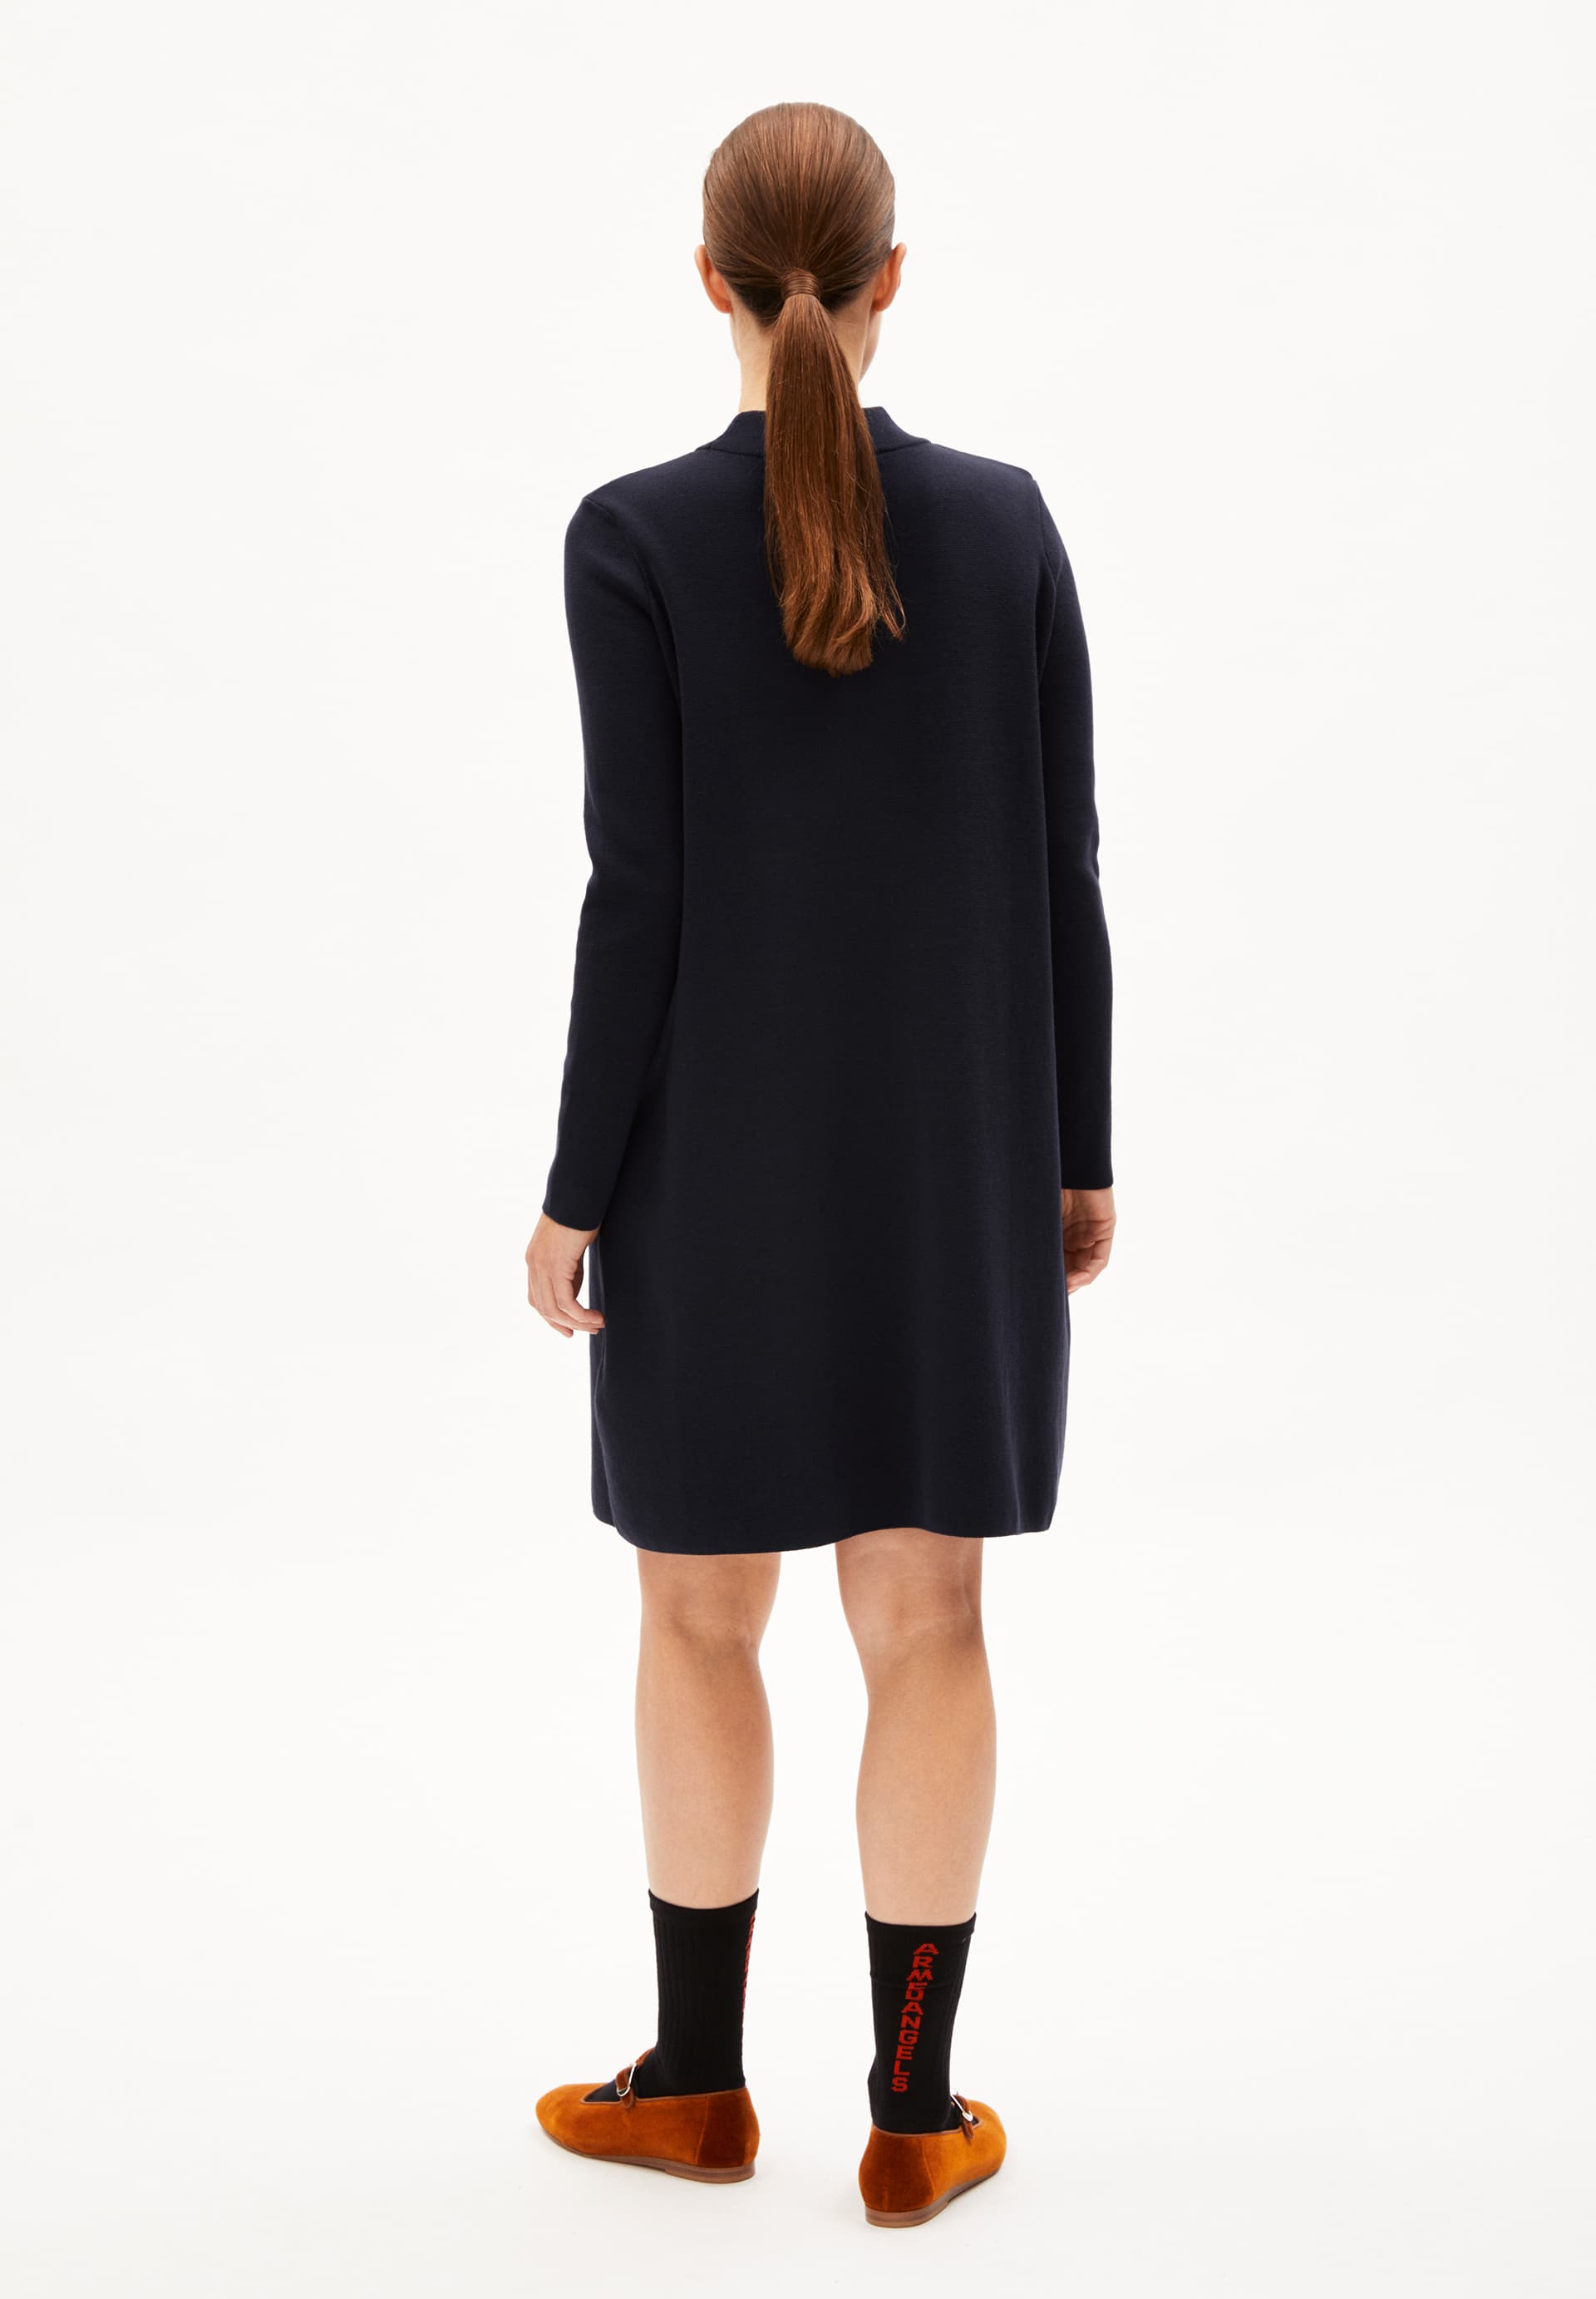 FRIADAA Knit Dress Relaxed Fit made of Organic Cotton